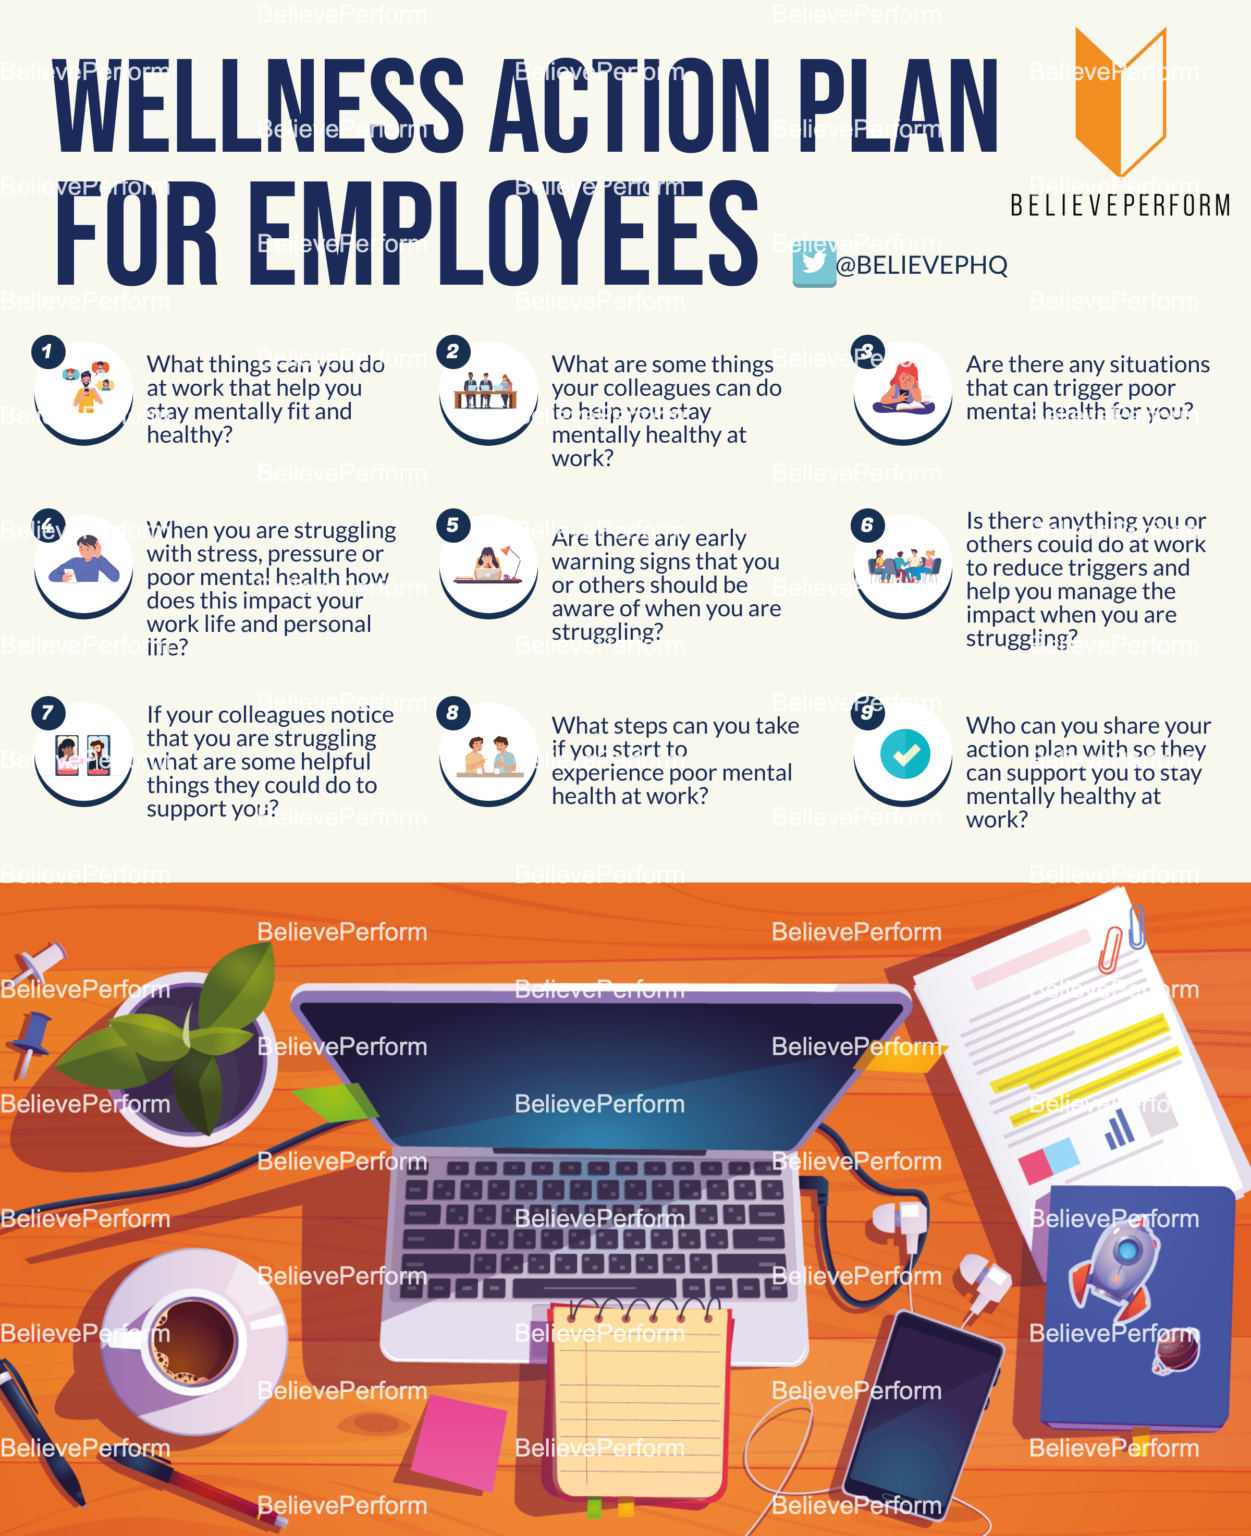 wellness-action-plan-for-employees-believeperform-the-uk-s-leading